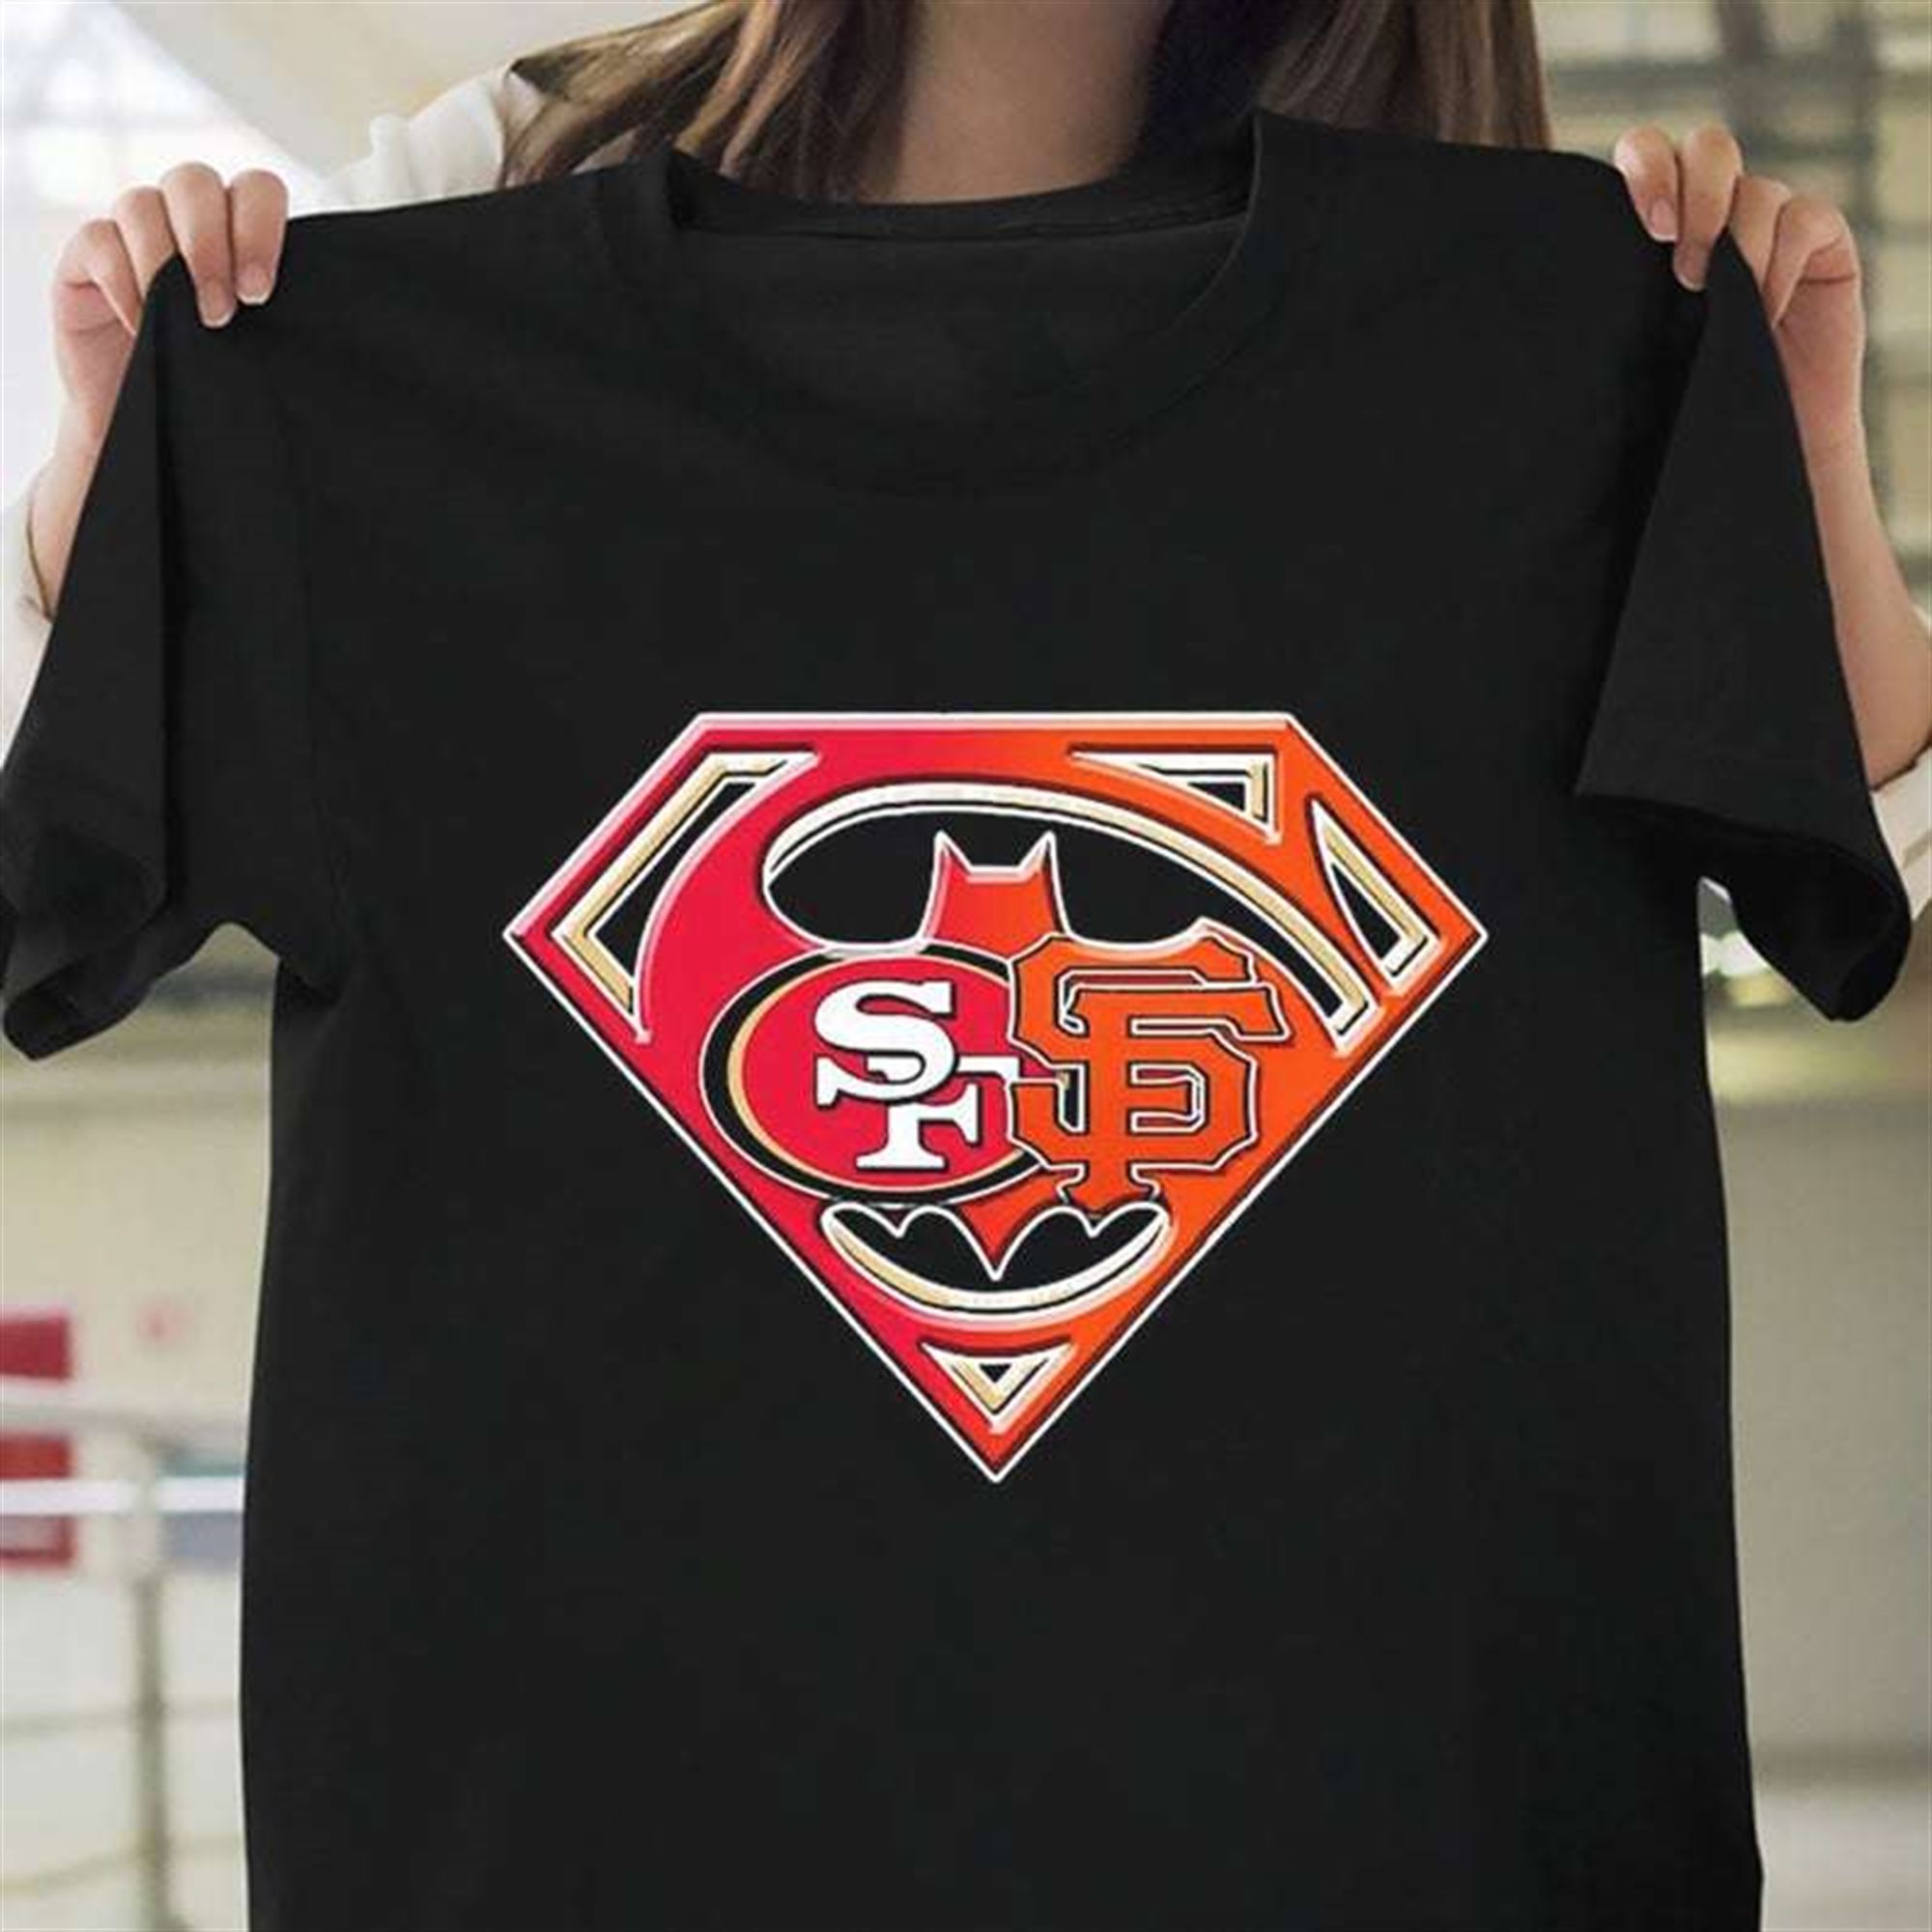 Superman San Francisco 49ers And San Francisco Giants T-shirt Size Up To 5xl